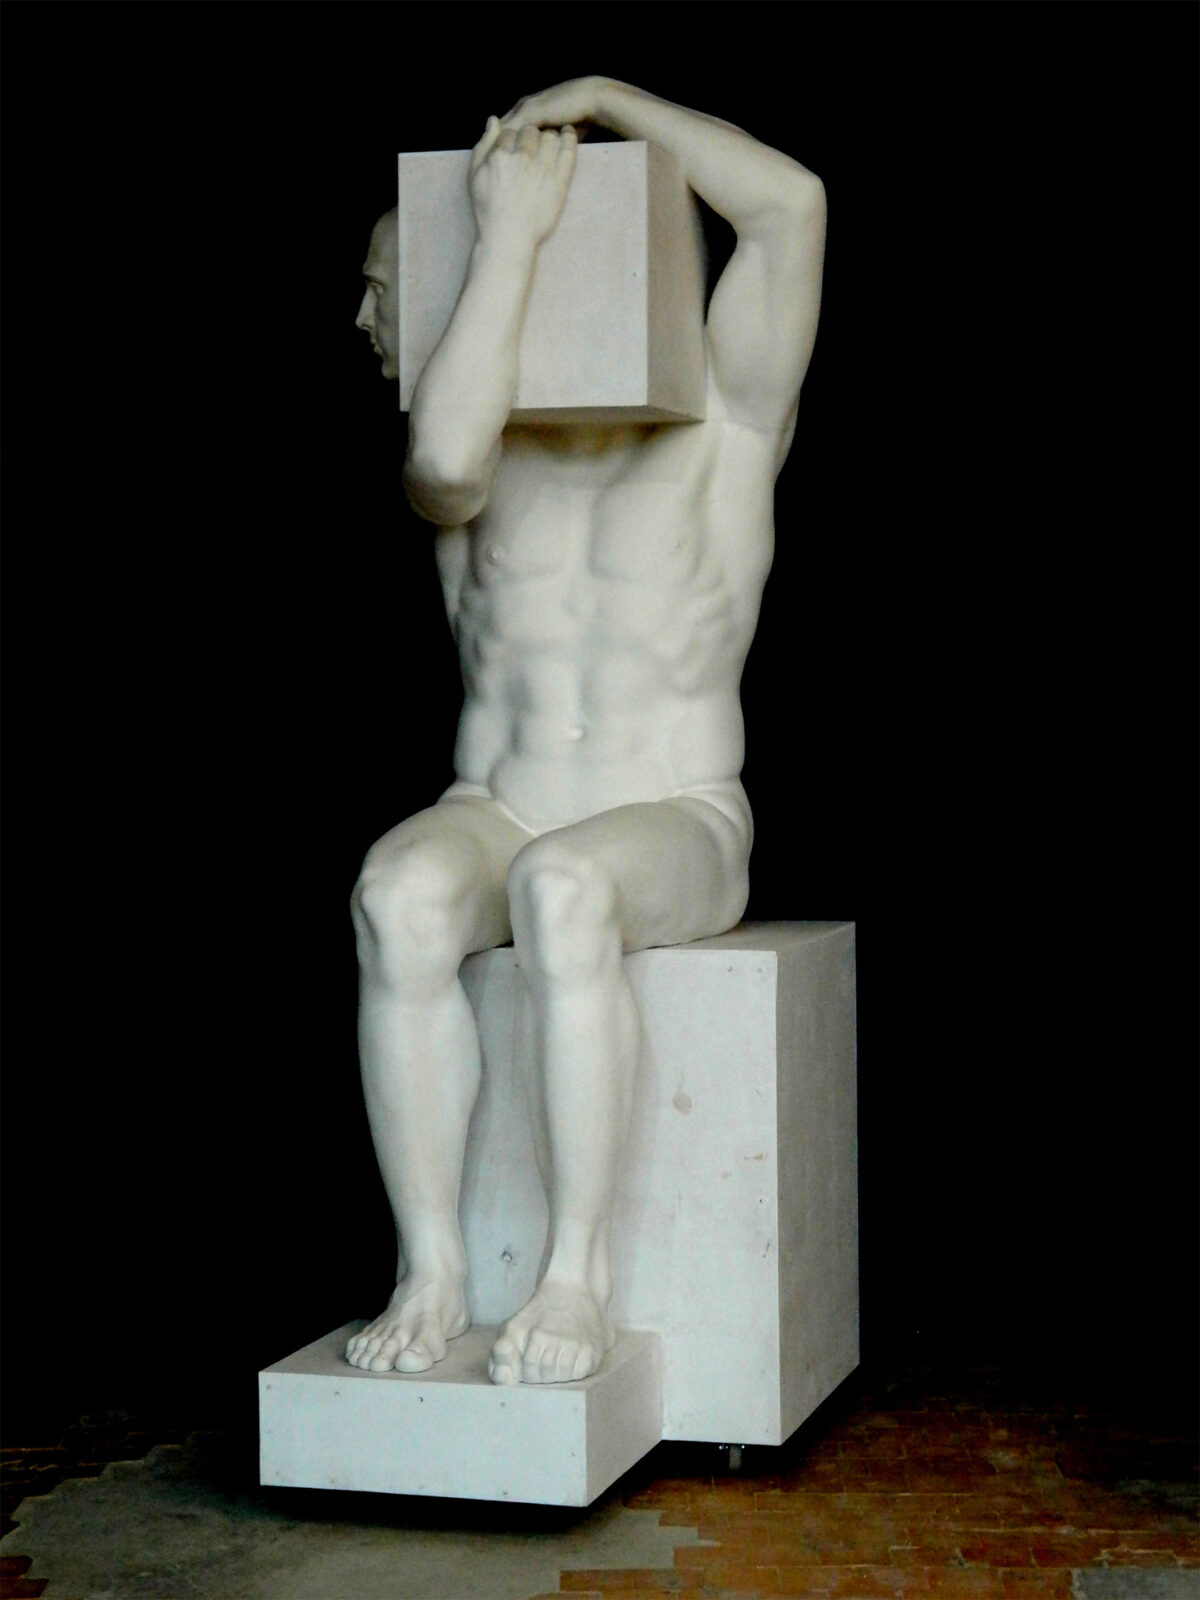 Formidable Granite And Marble Sculptures By Adrian Balogh (4)